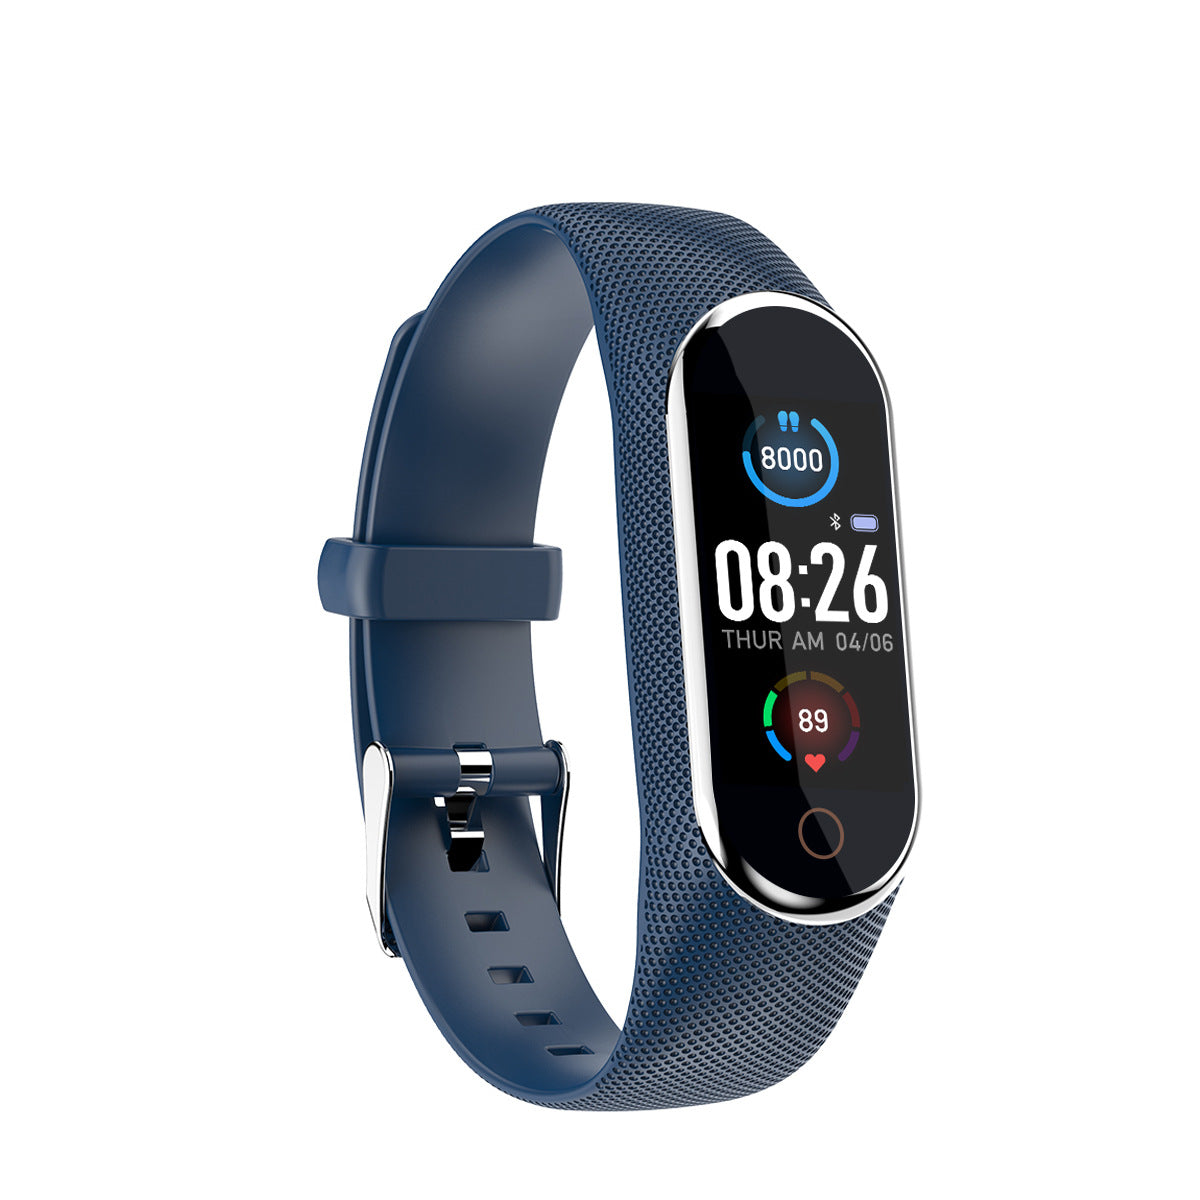 New M8 Smart Bracelet with ECG, Heart Rate, and Sleep Monitoring